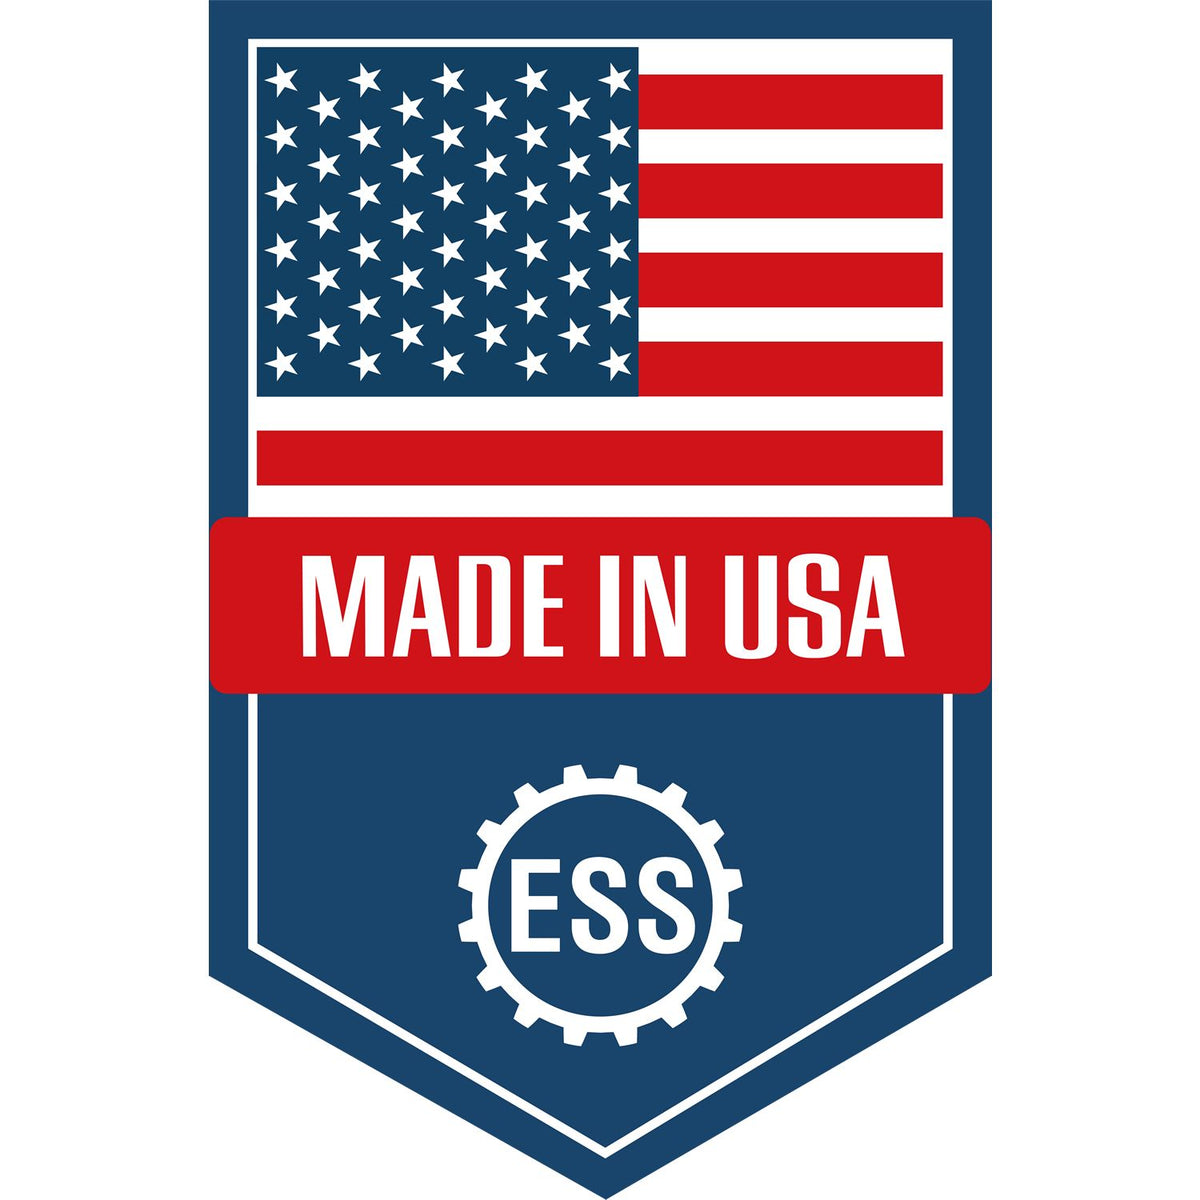 An icon or graphic with an american flag and text reading Made in USA for the Soft Washington Professional Engineer Seal